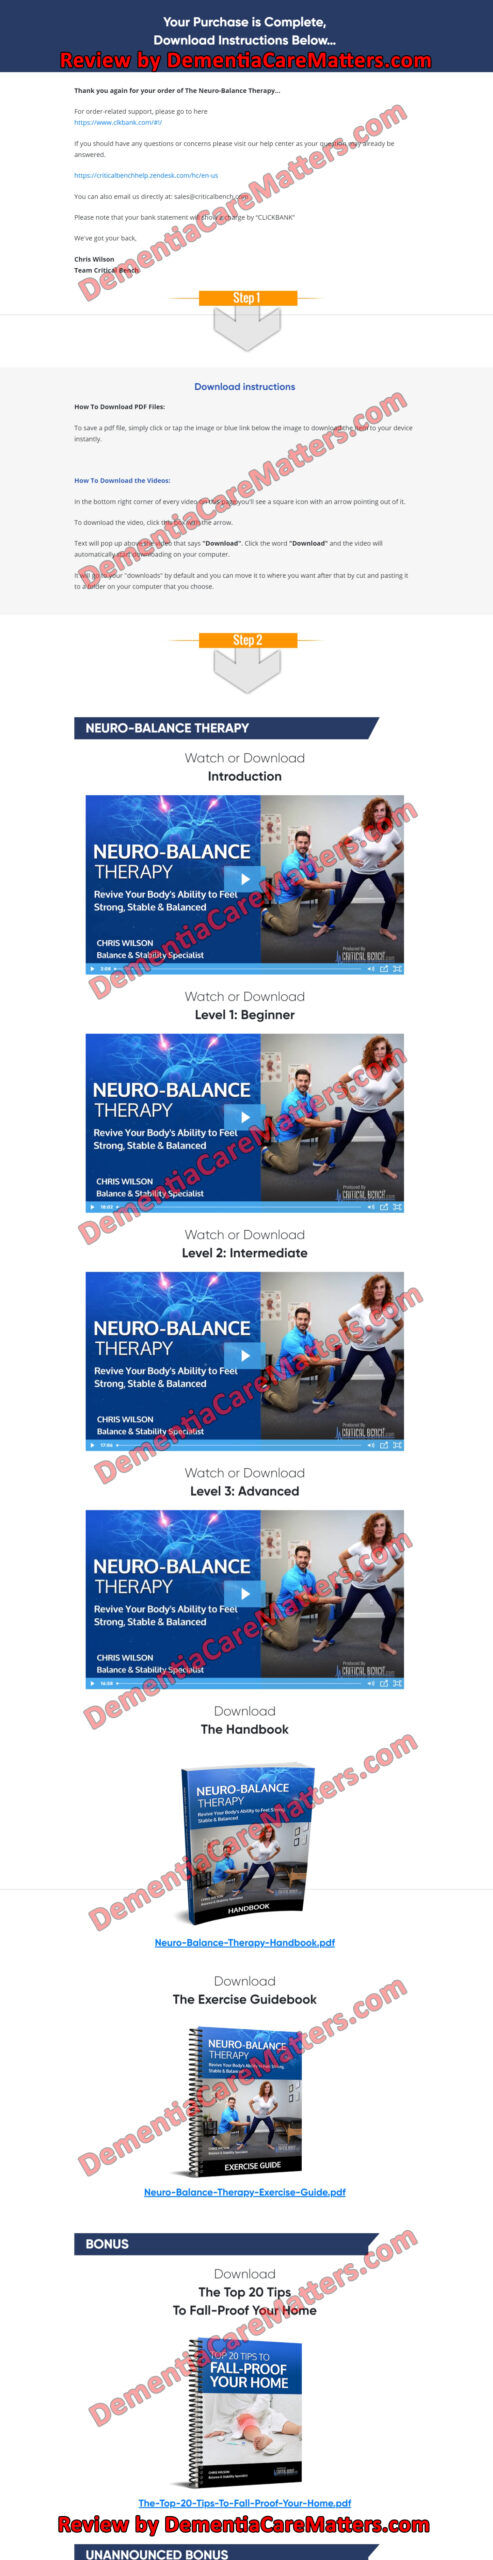 neuro-balance therapy download page